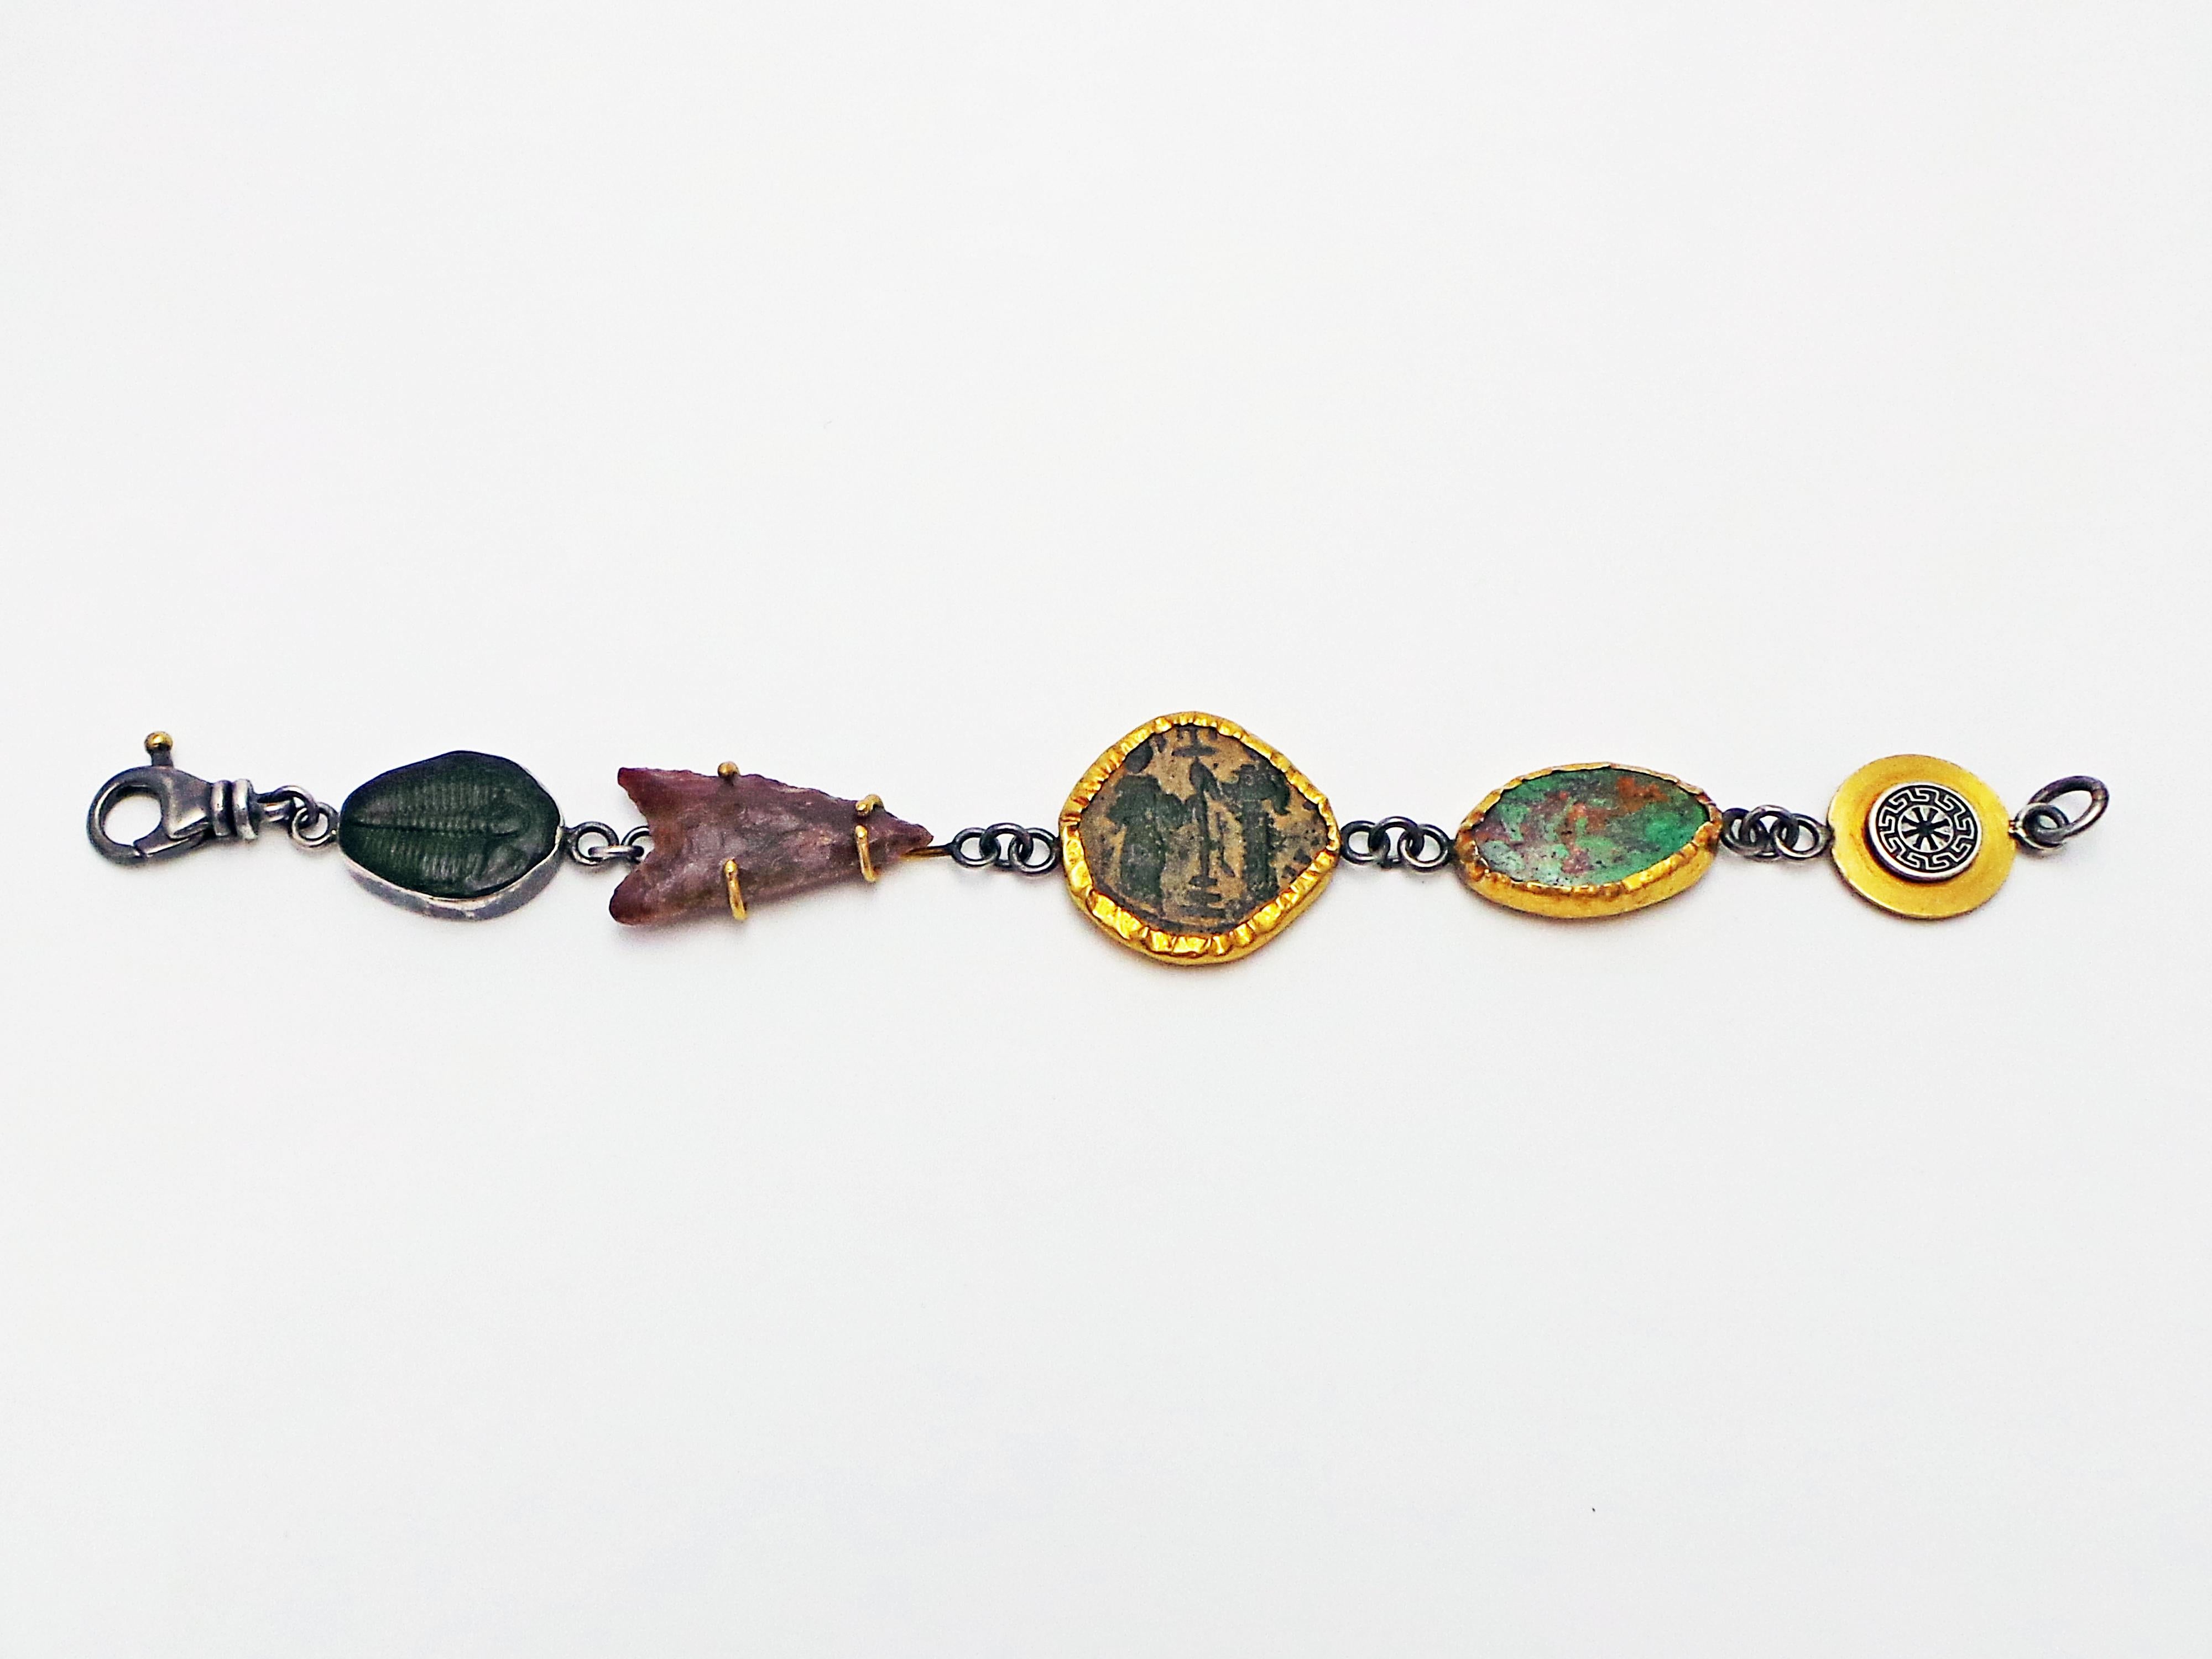 Bohemian bracelet featuring an authentic ancient Byzantine coin (Kōnstantinos X, Follis, AD 1059-1067), stone arrowhead, Trilobite fossil, and Kings Manassa turquoise (from the closed mine in Colorado, USA) linked together with oxidized sterling